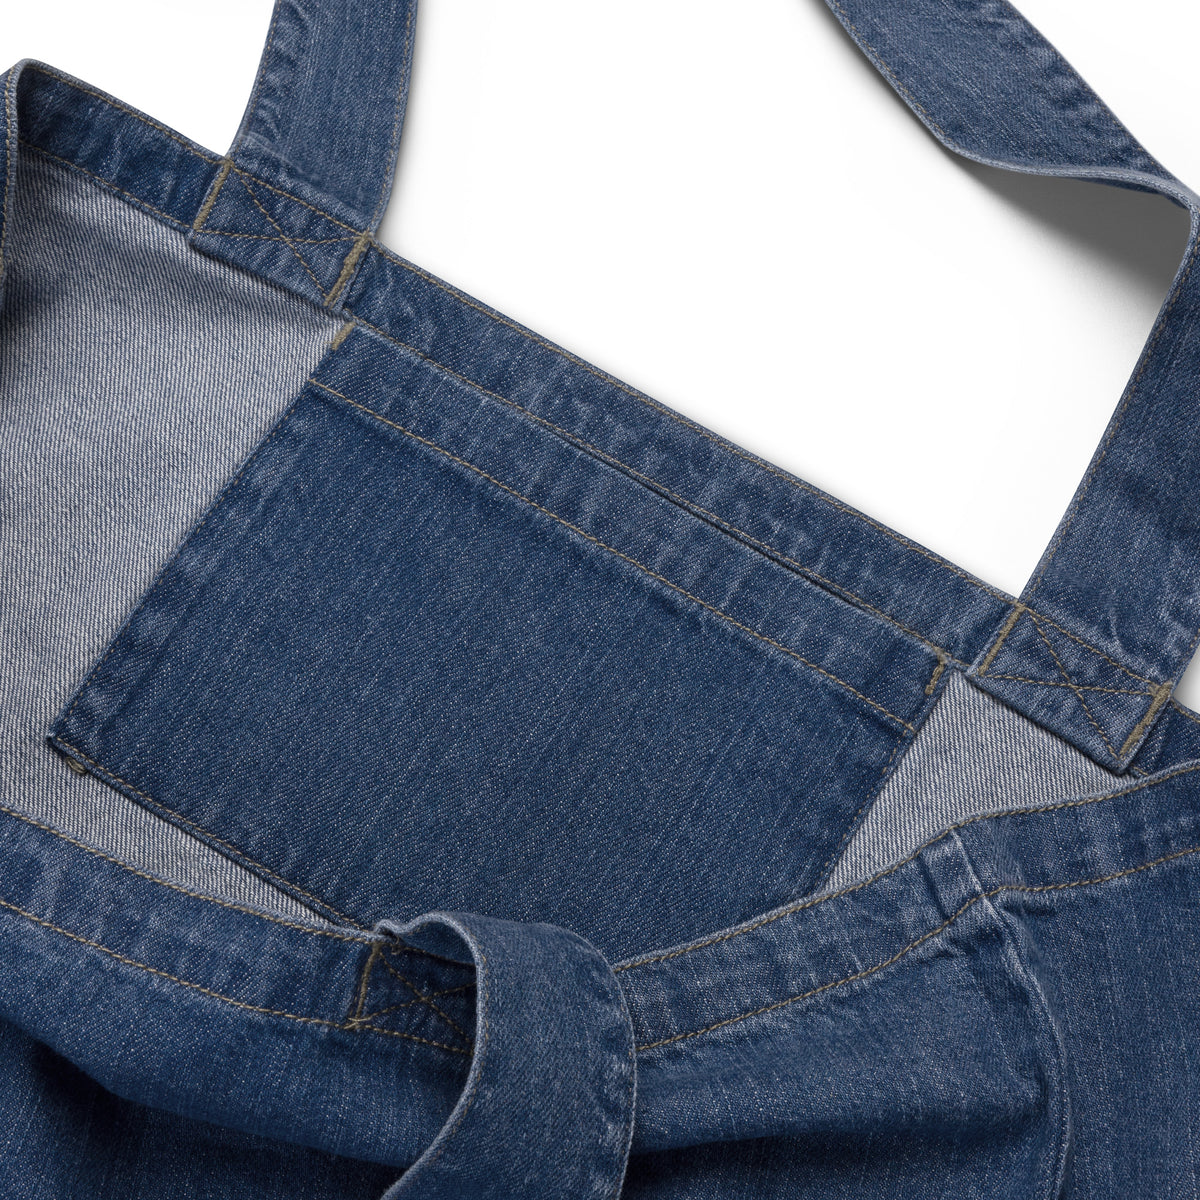 Let The Good Times Roll Denim Tote